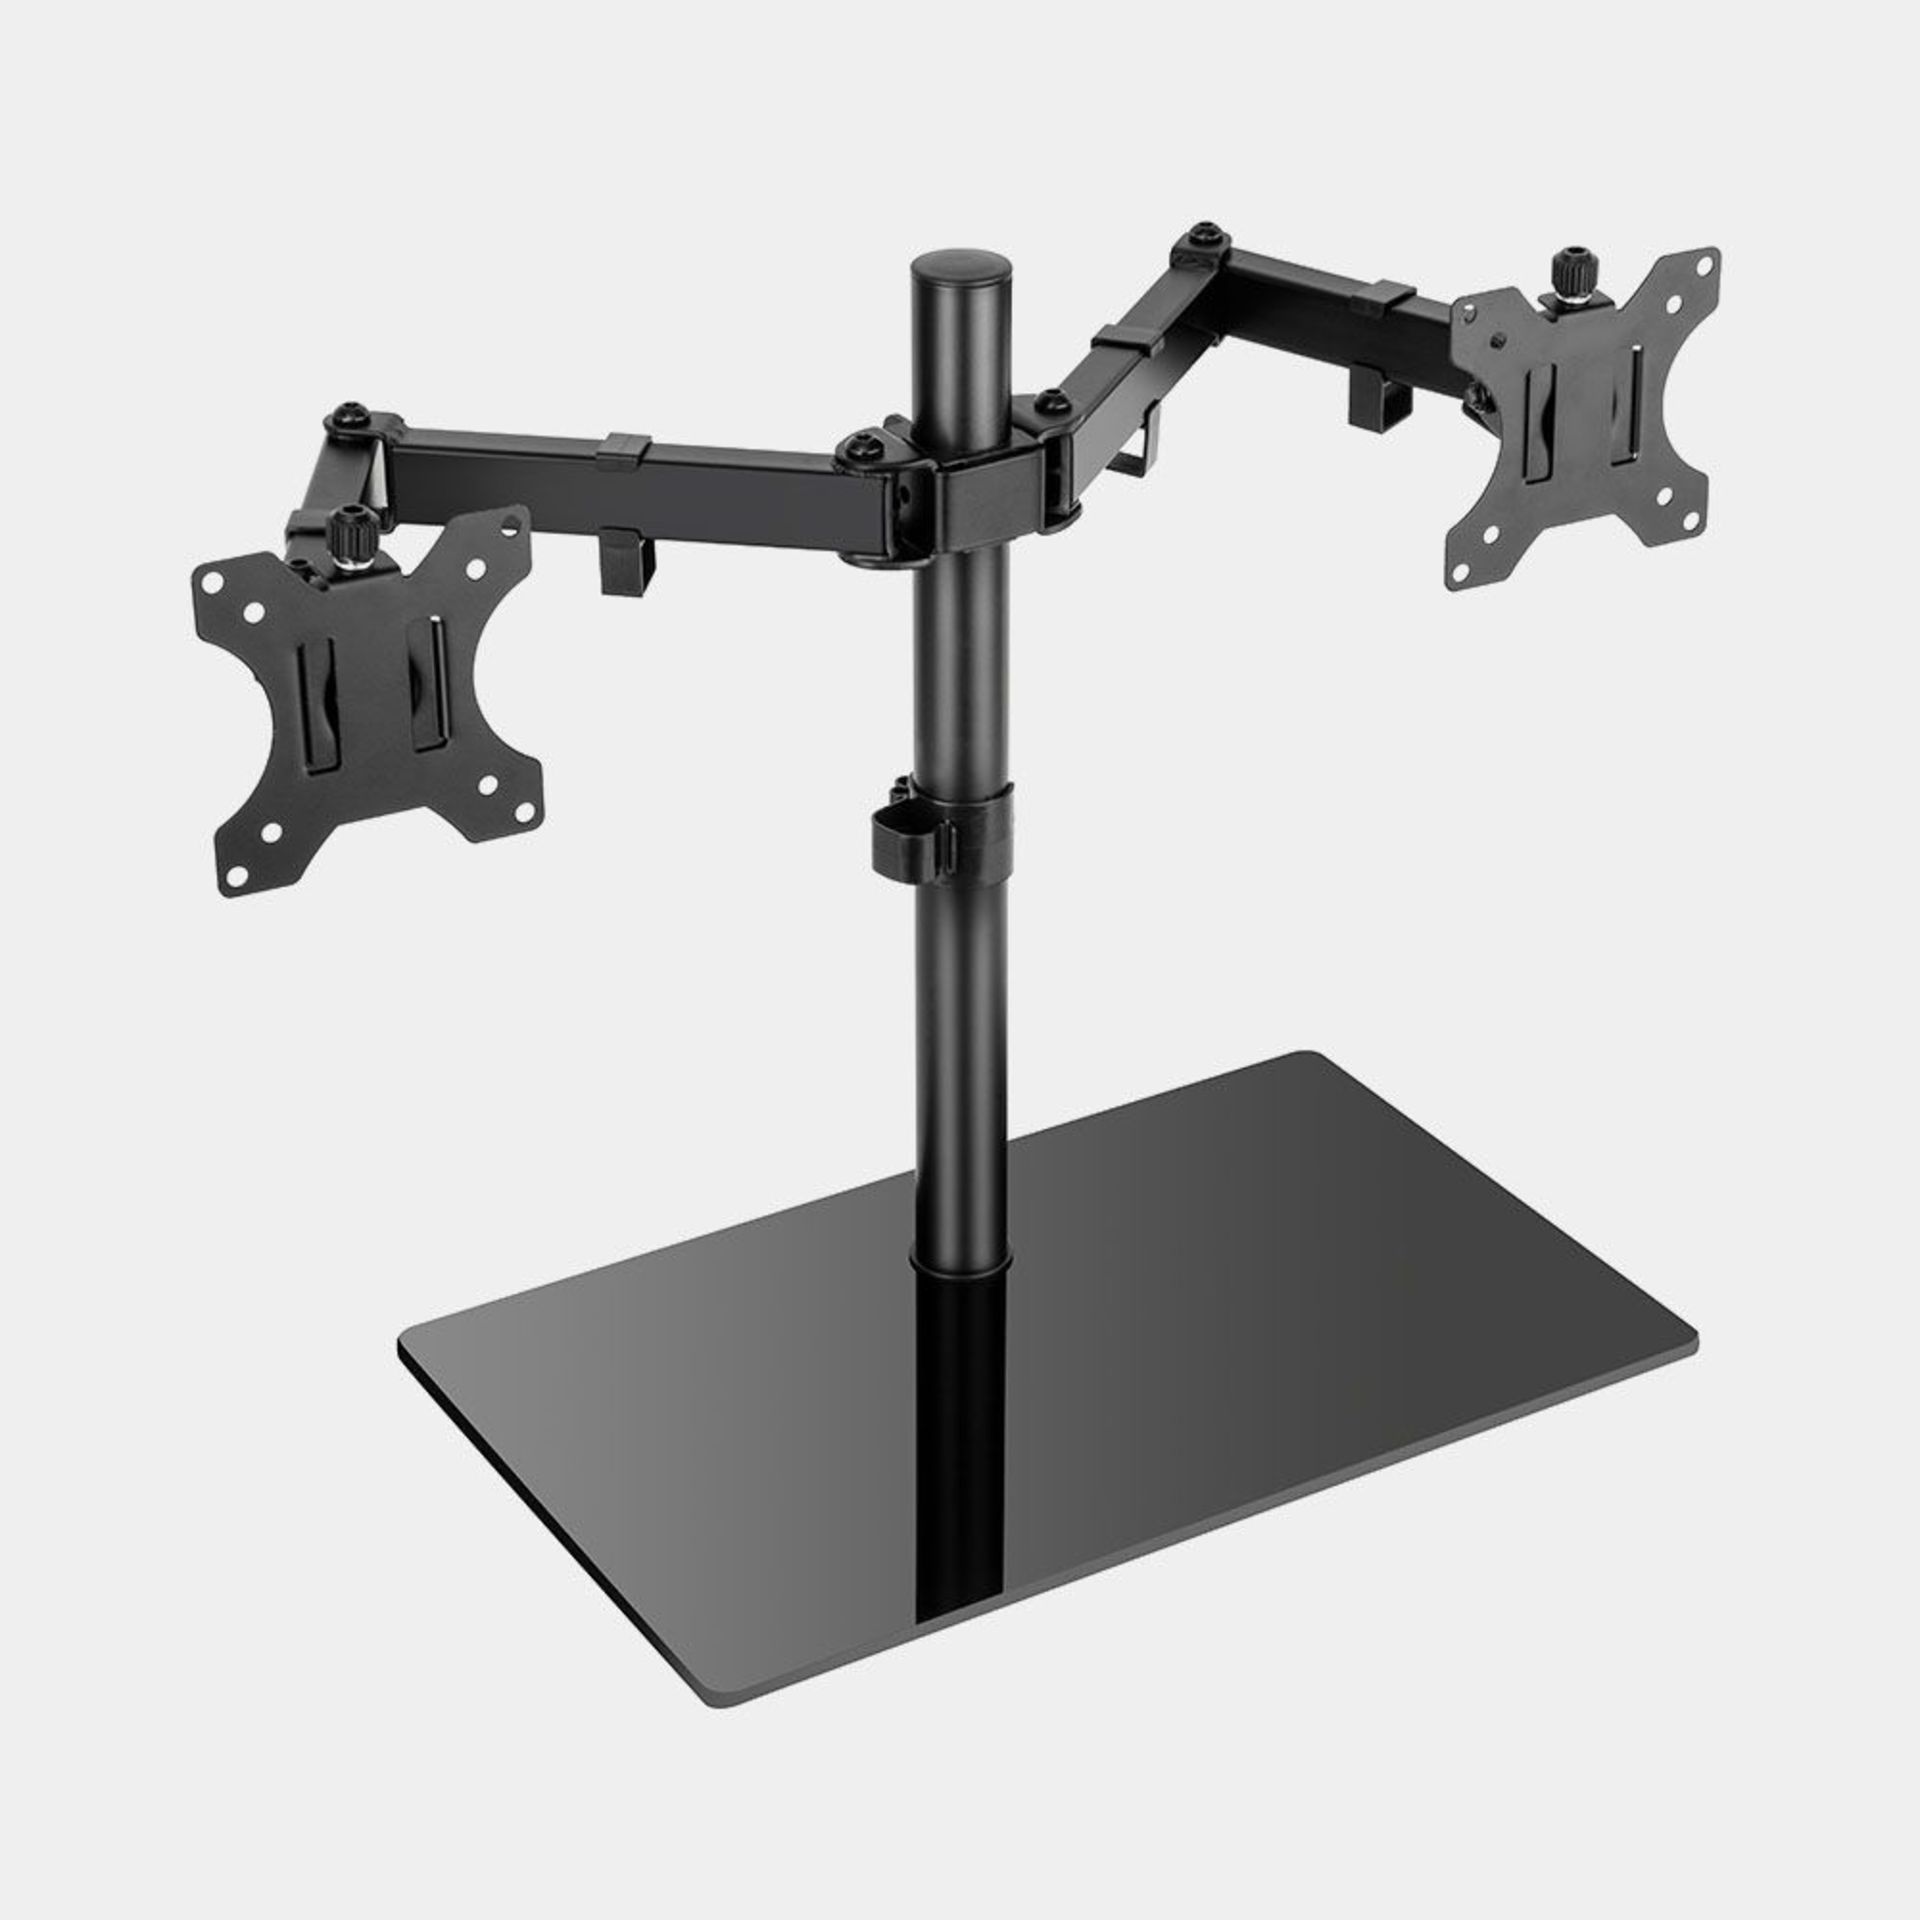 Dual Monitor Stand With Glass Base. - BI. Double your productivity by doubling your screens with our